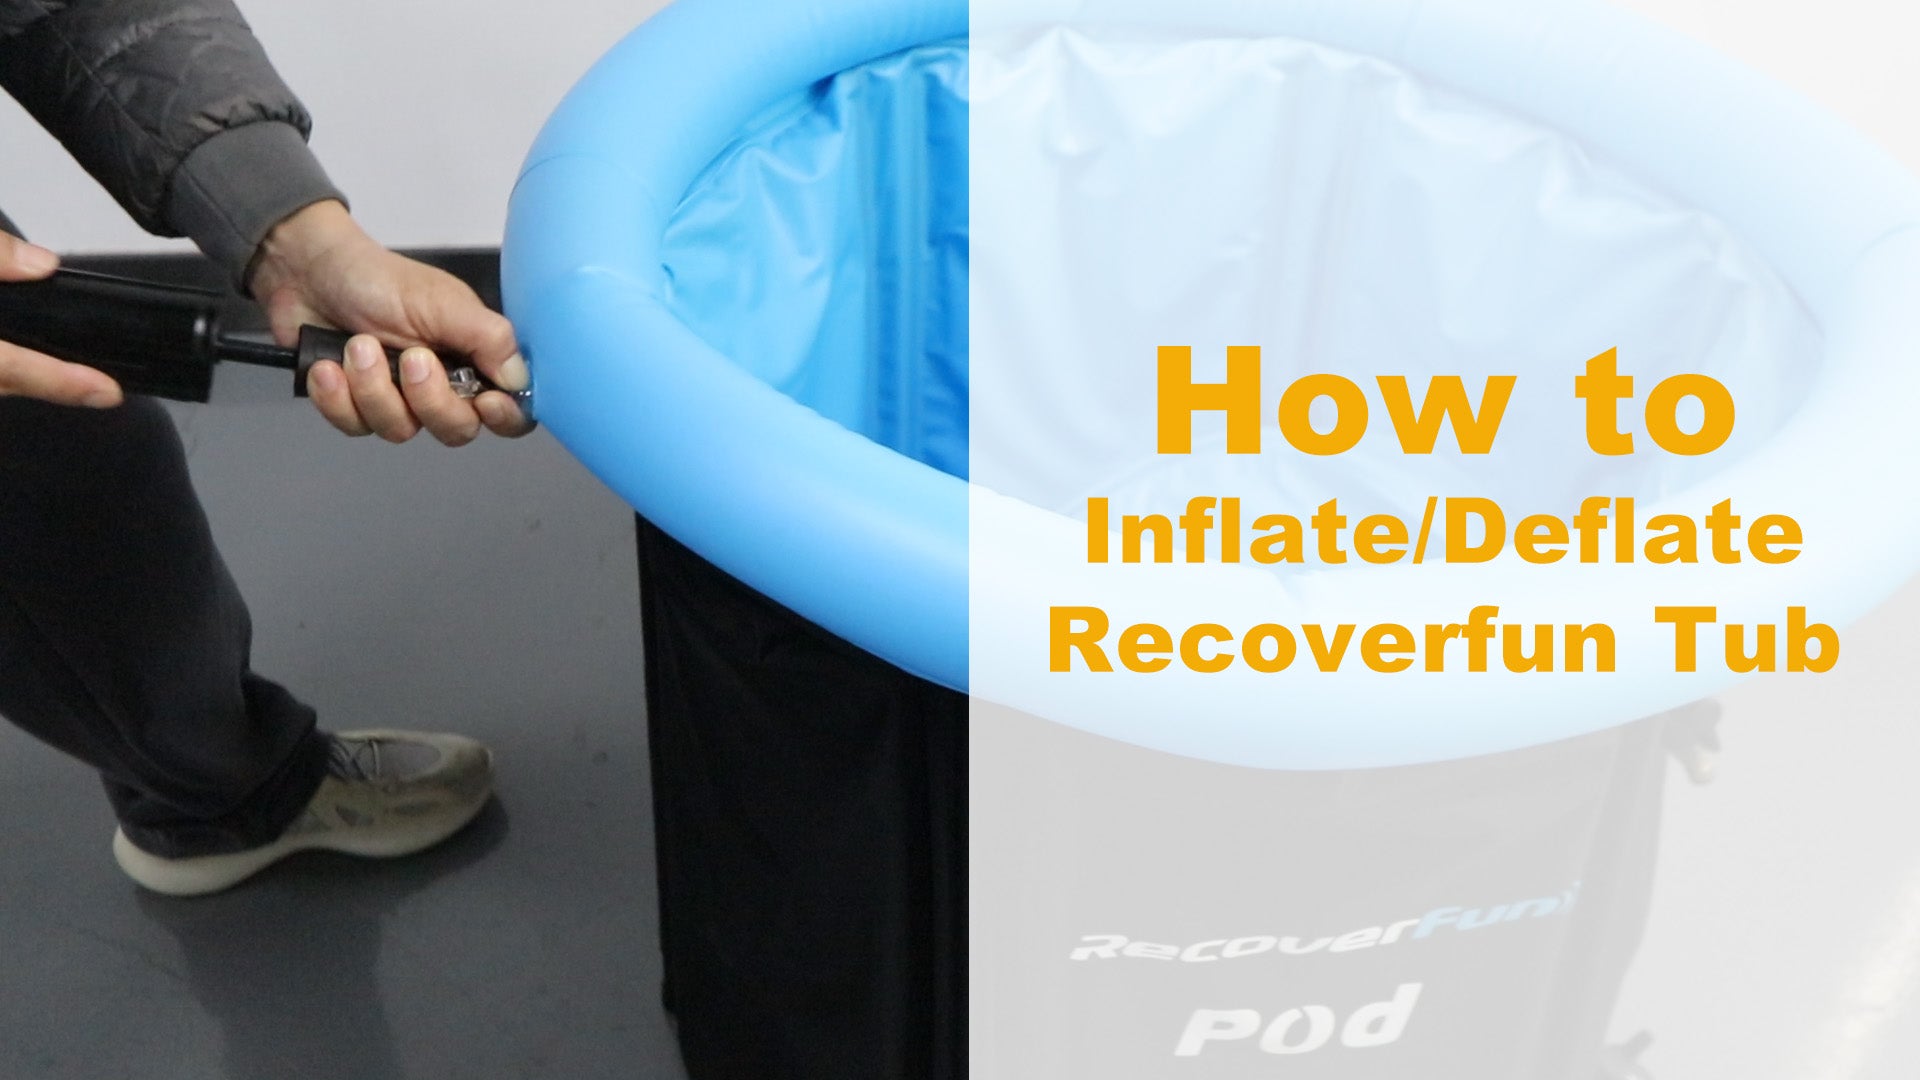 Load video: How to Inflate / Deflate Recoverfun Tub